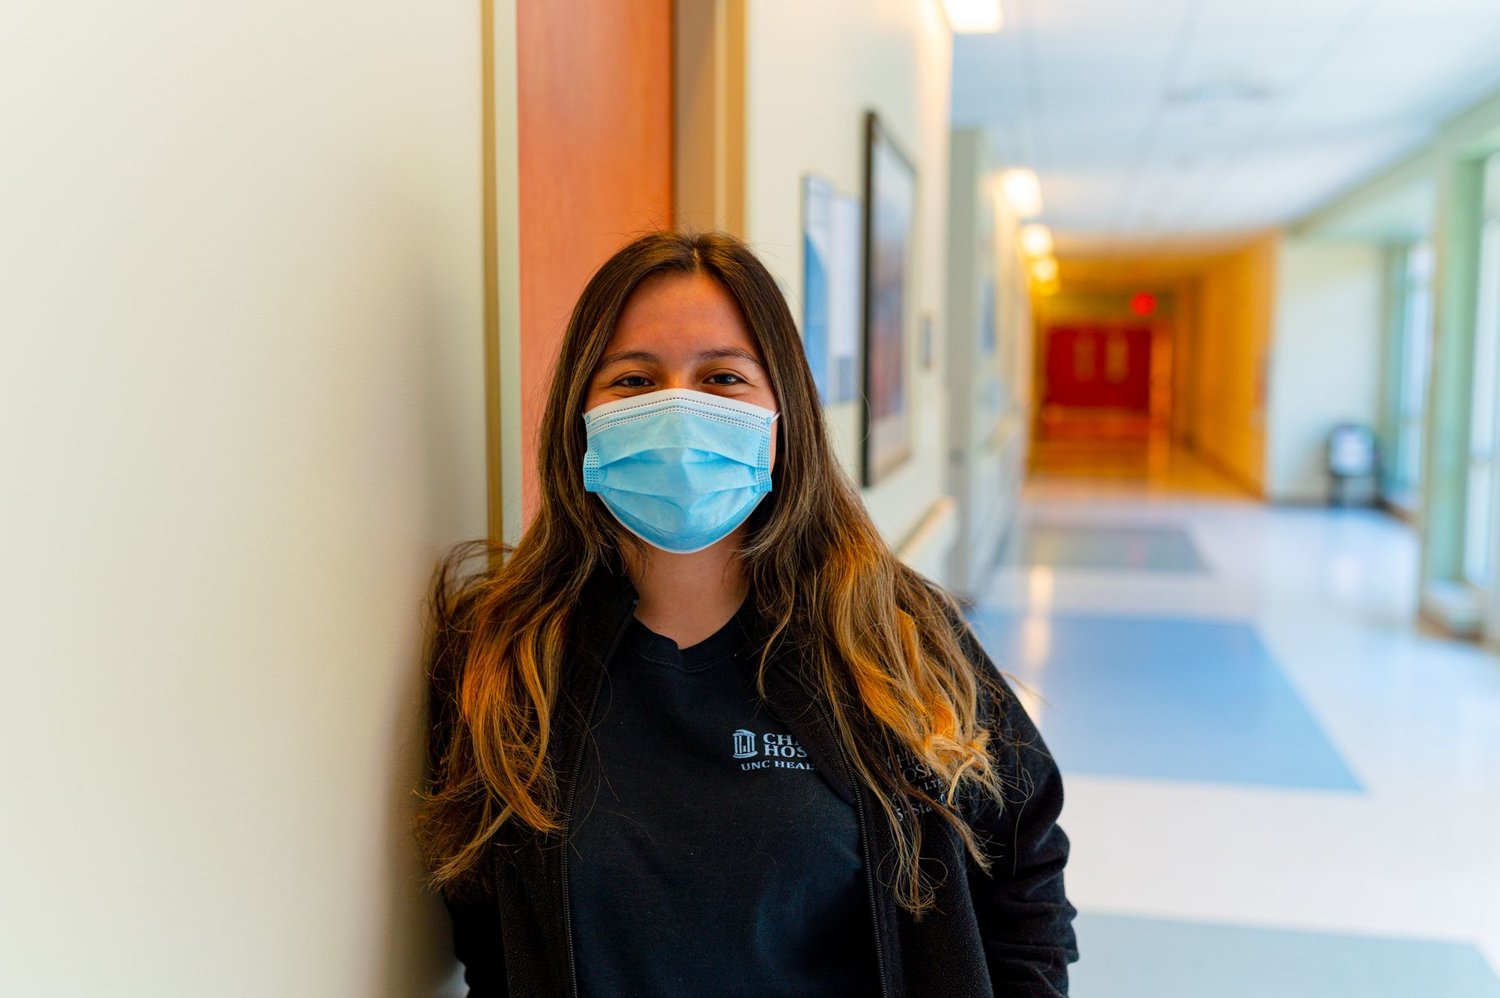 Libdy Lopez, a nursing assistant at Chatham Hospital. 'This past year was very overwhelming. Everything was so new and scary. It was definitely a good experience to see the COVID patients who made it out and go back to their families.' (Picked by Hannah McClellan)